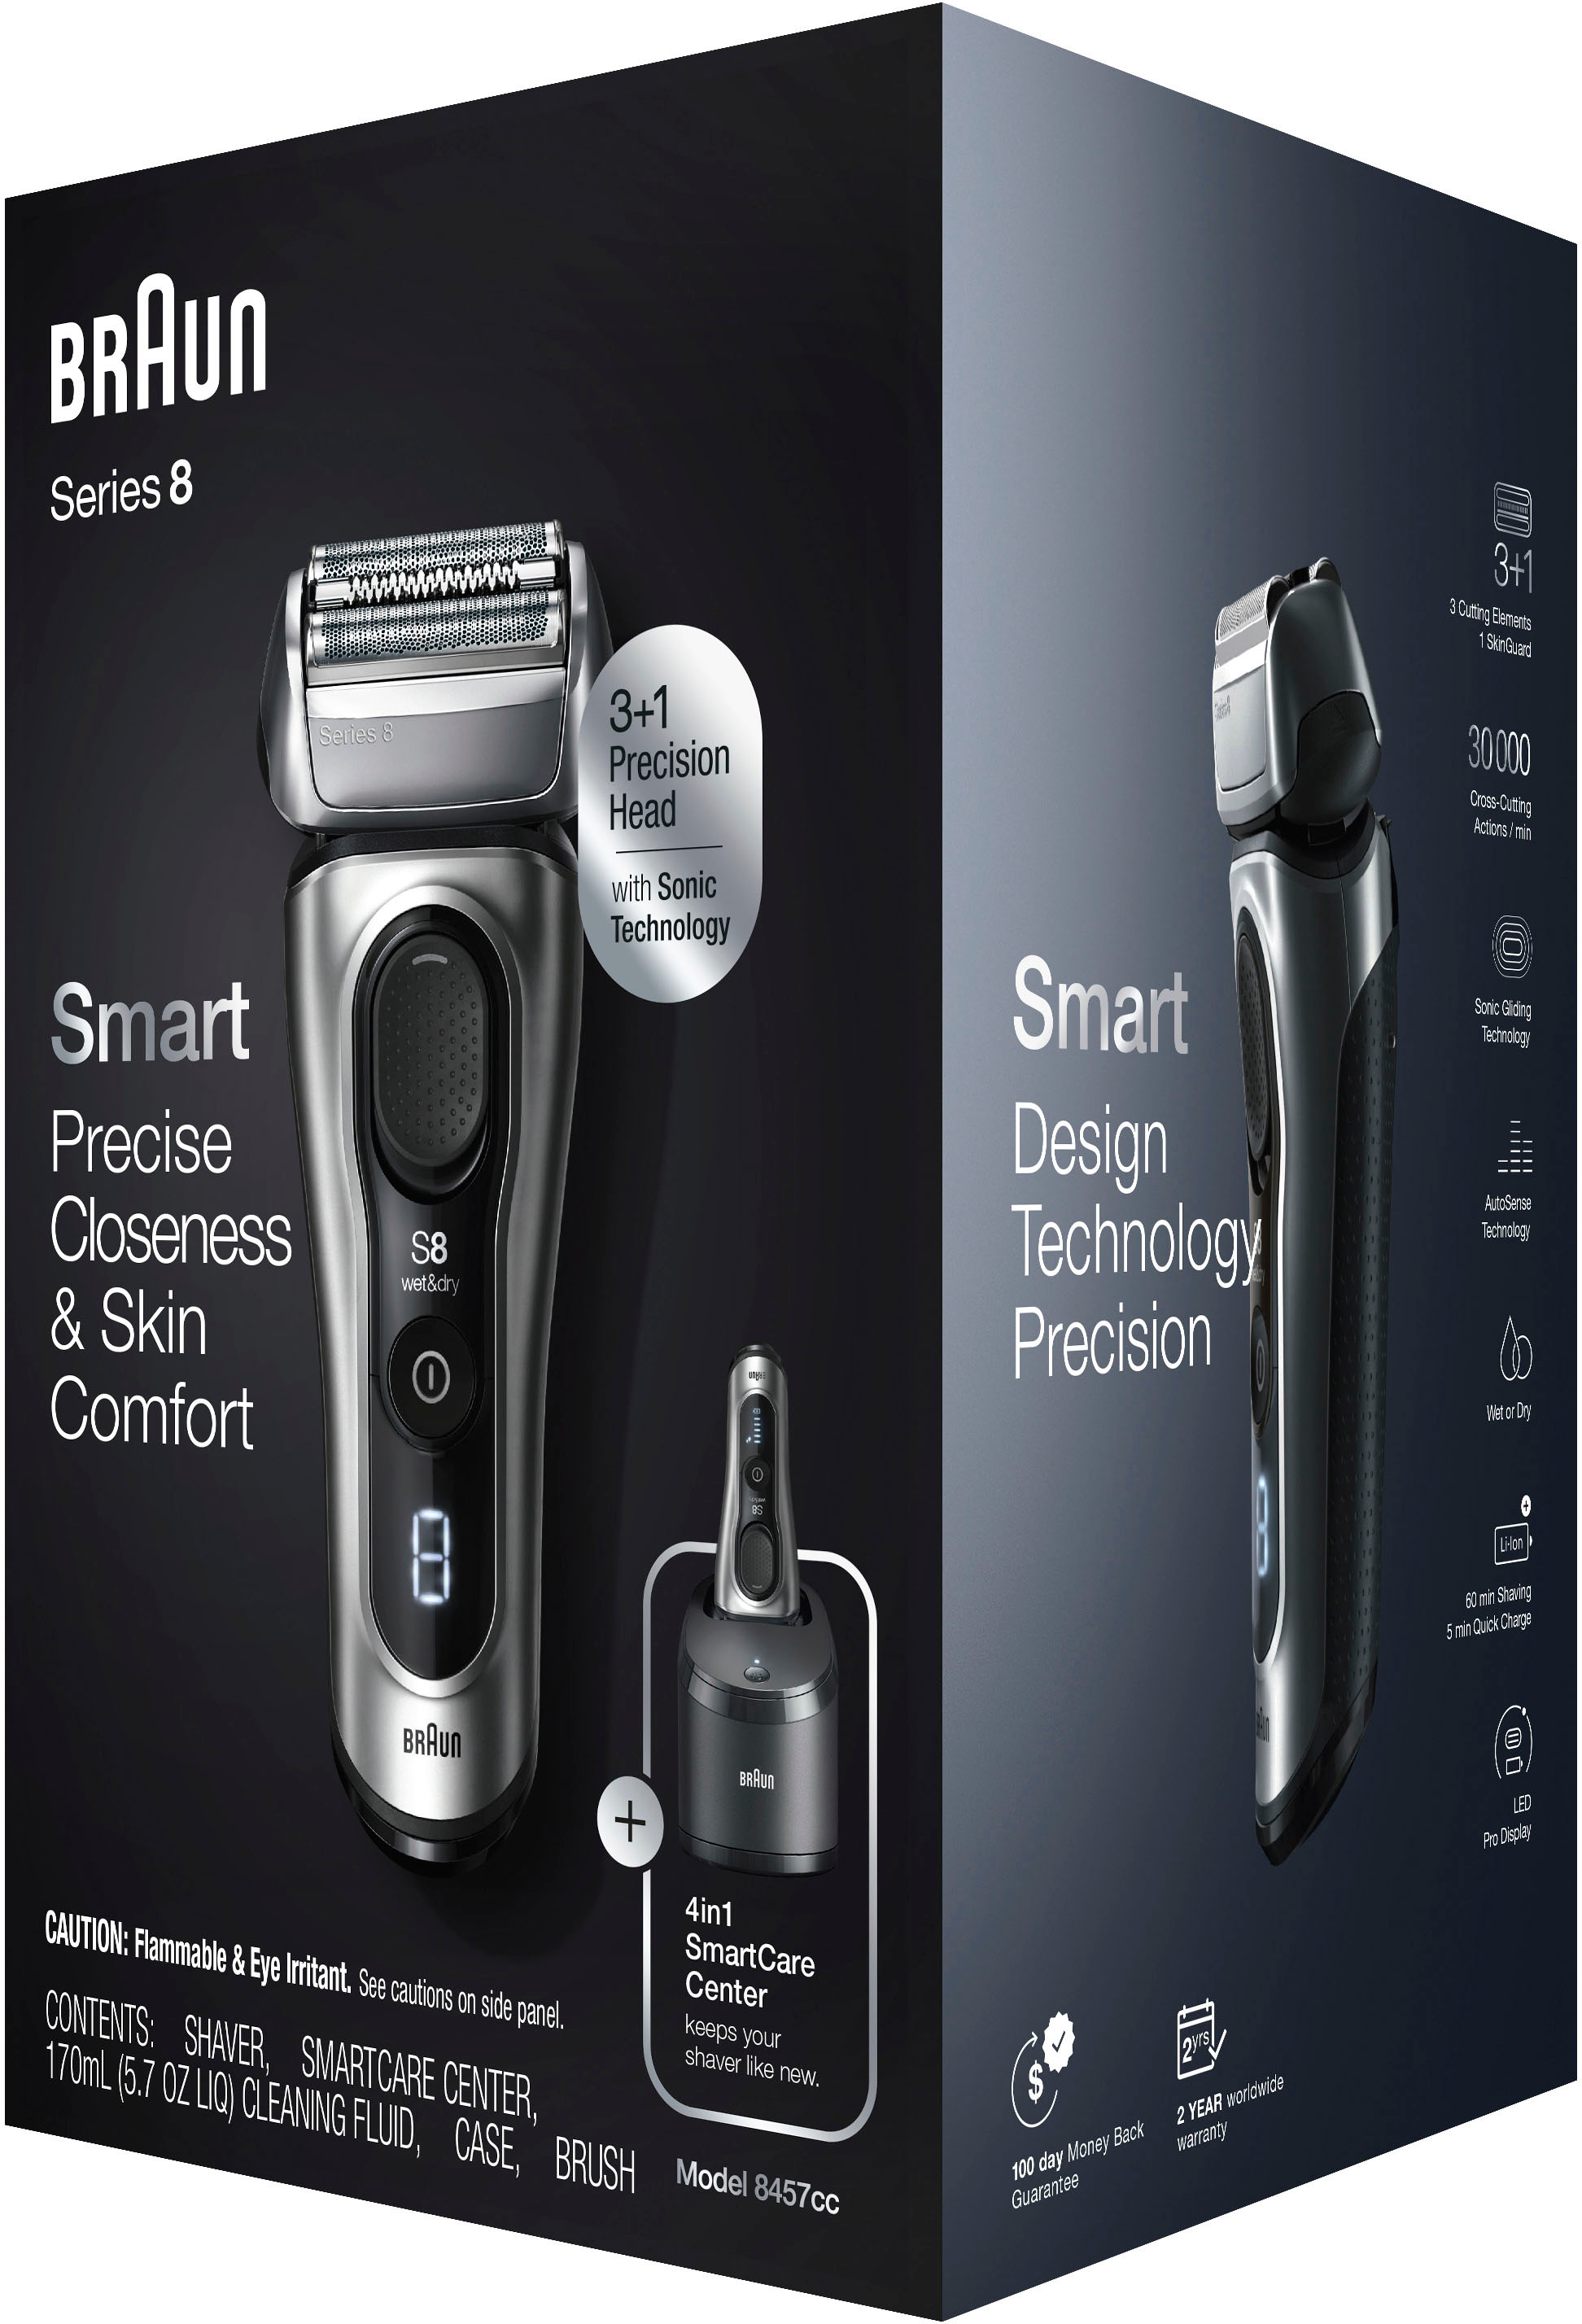 Braun Series 8 battery shaver collection